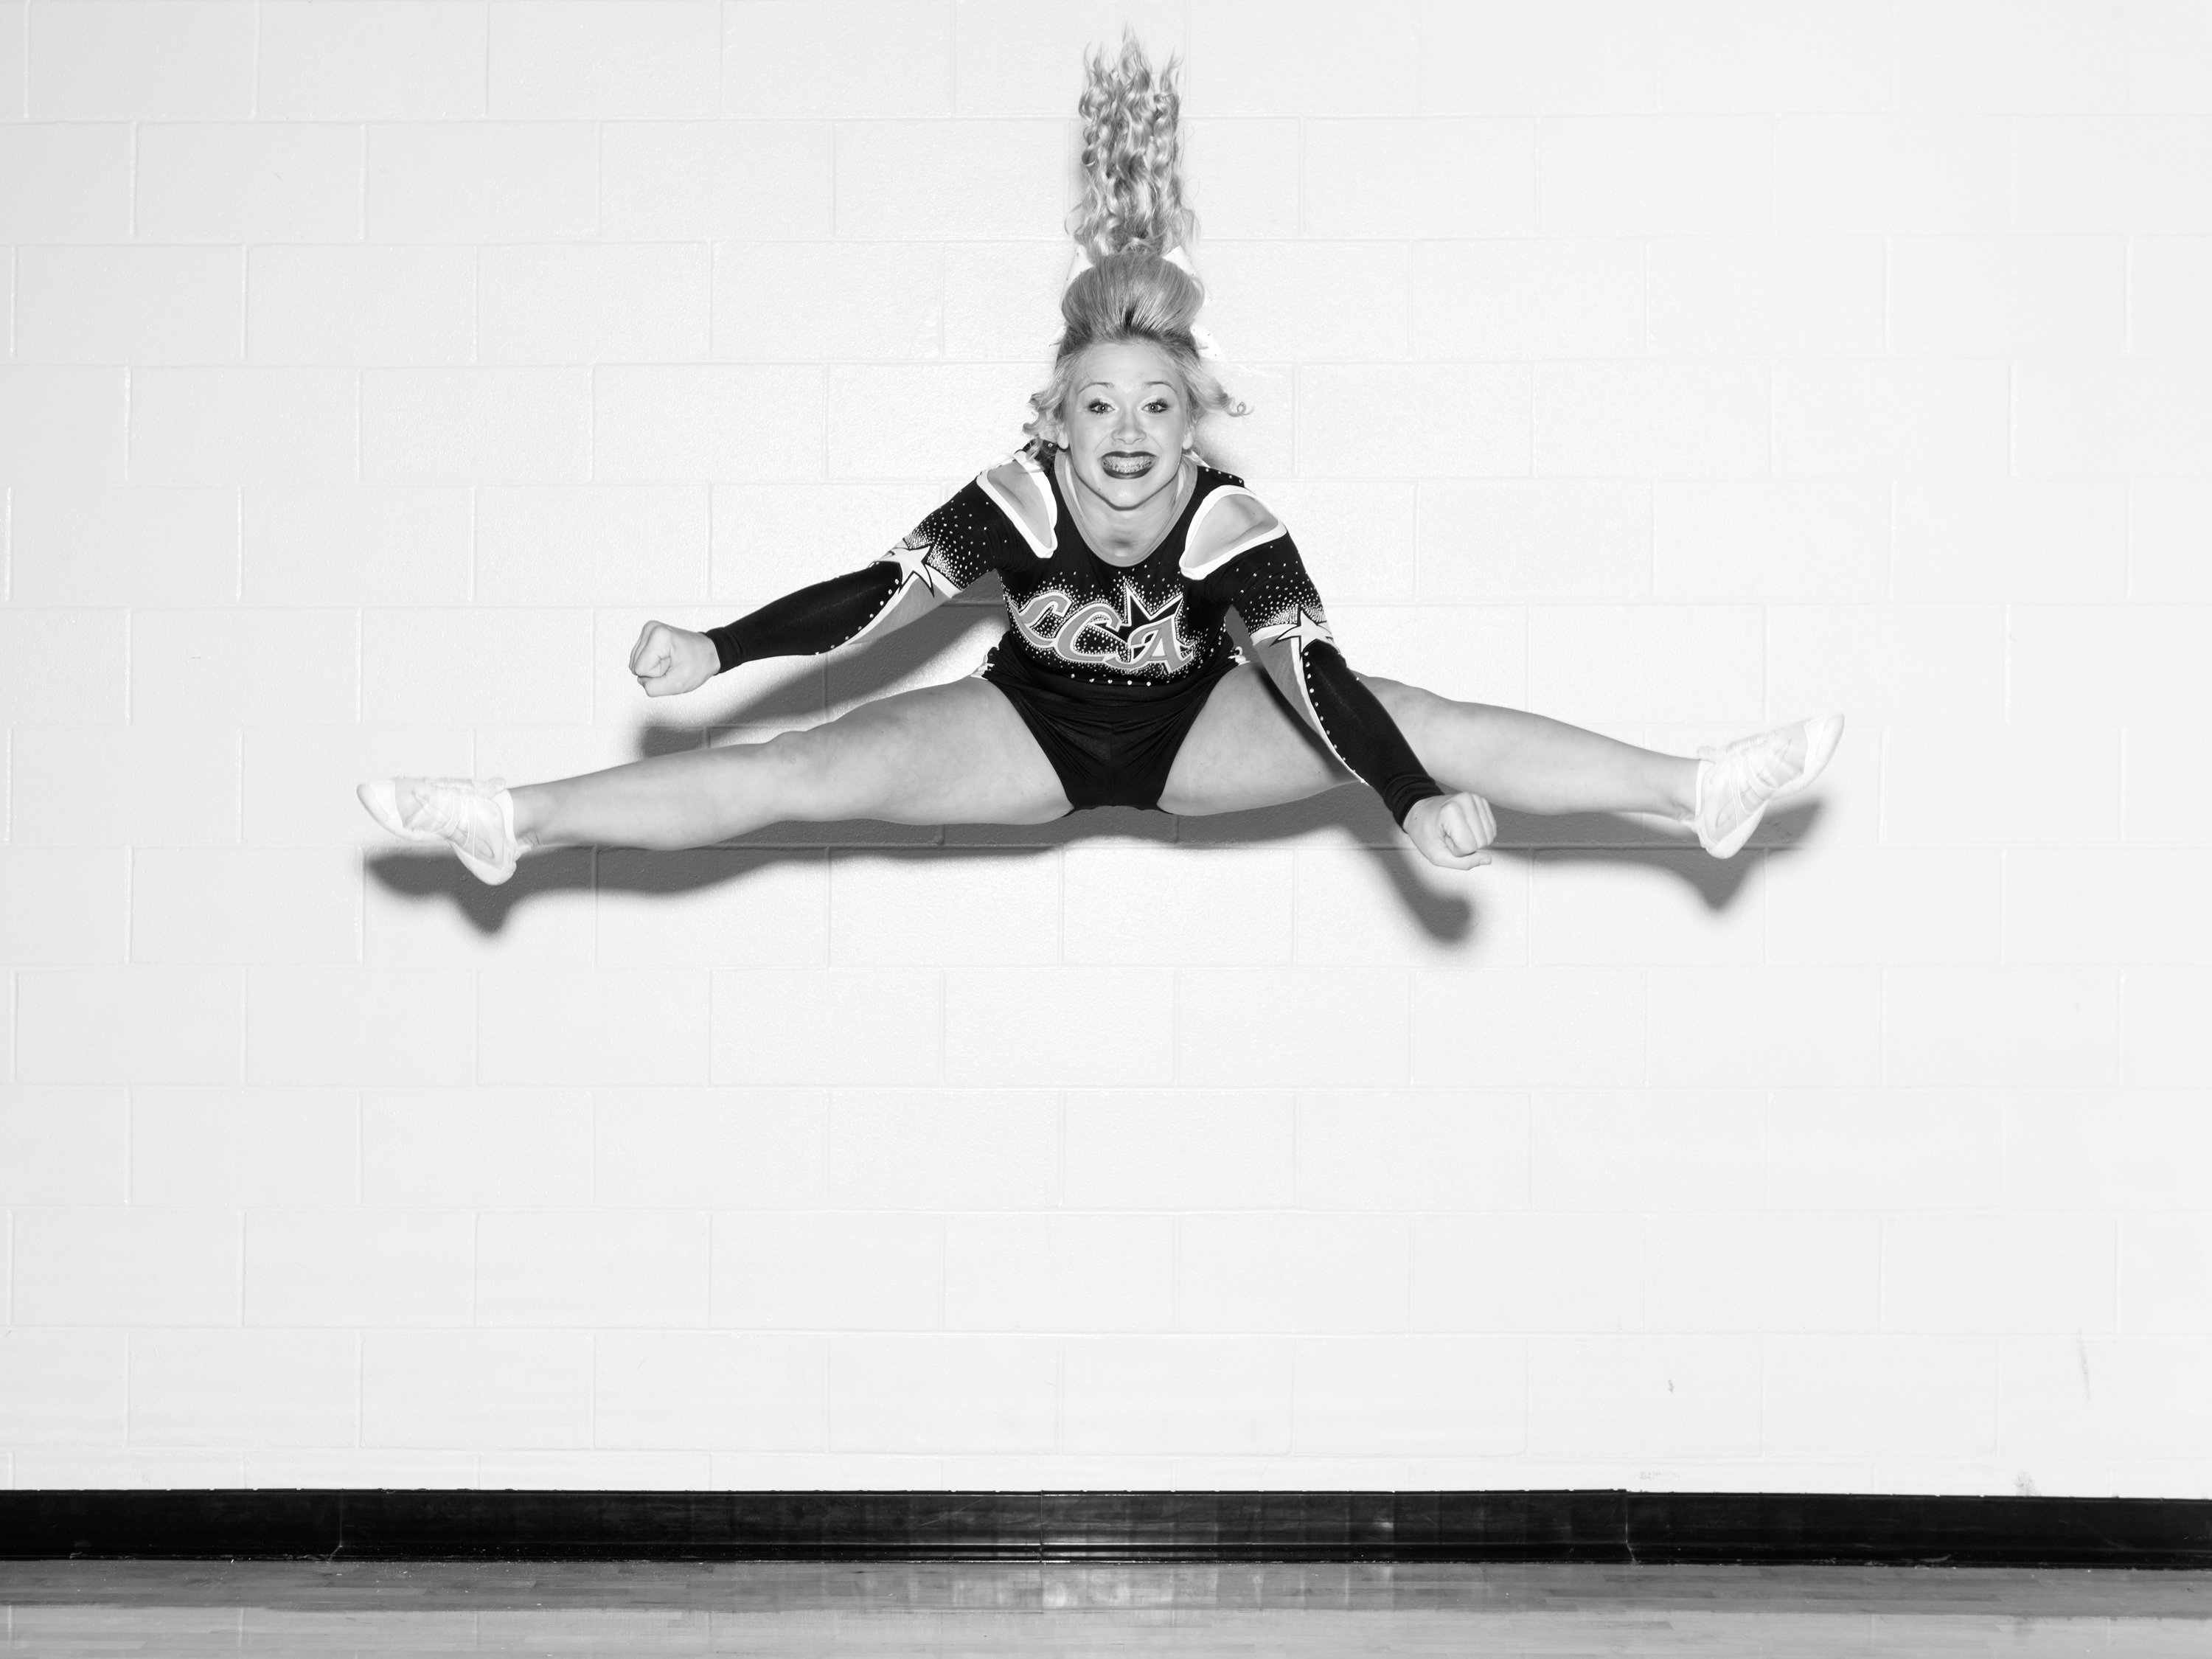 Black and white photograph of cheerleader in midair split